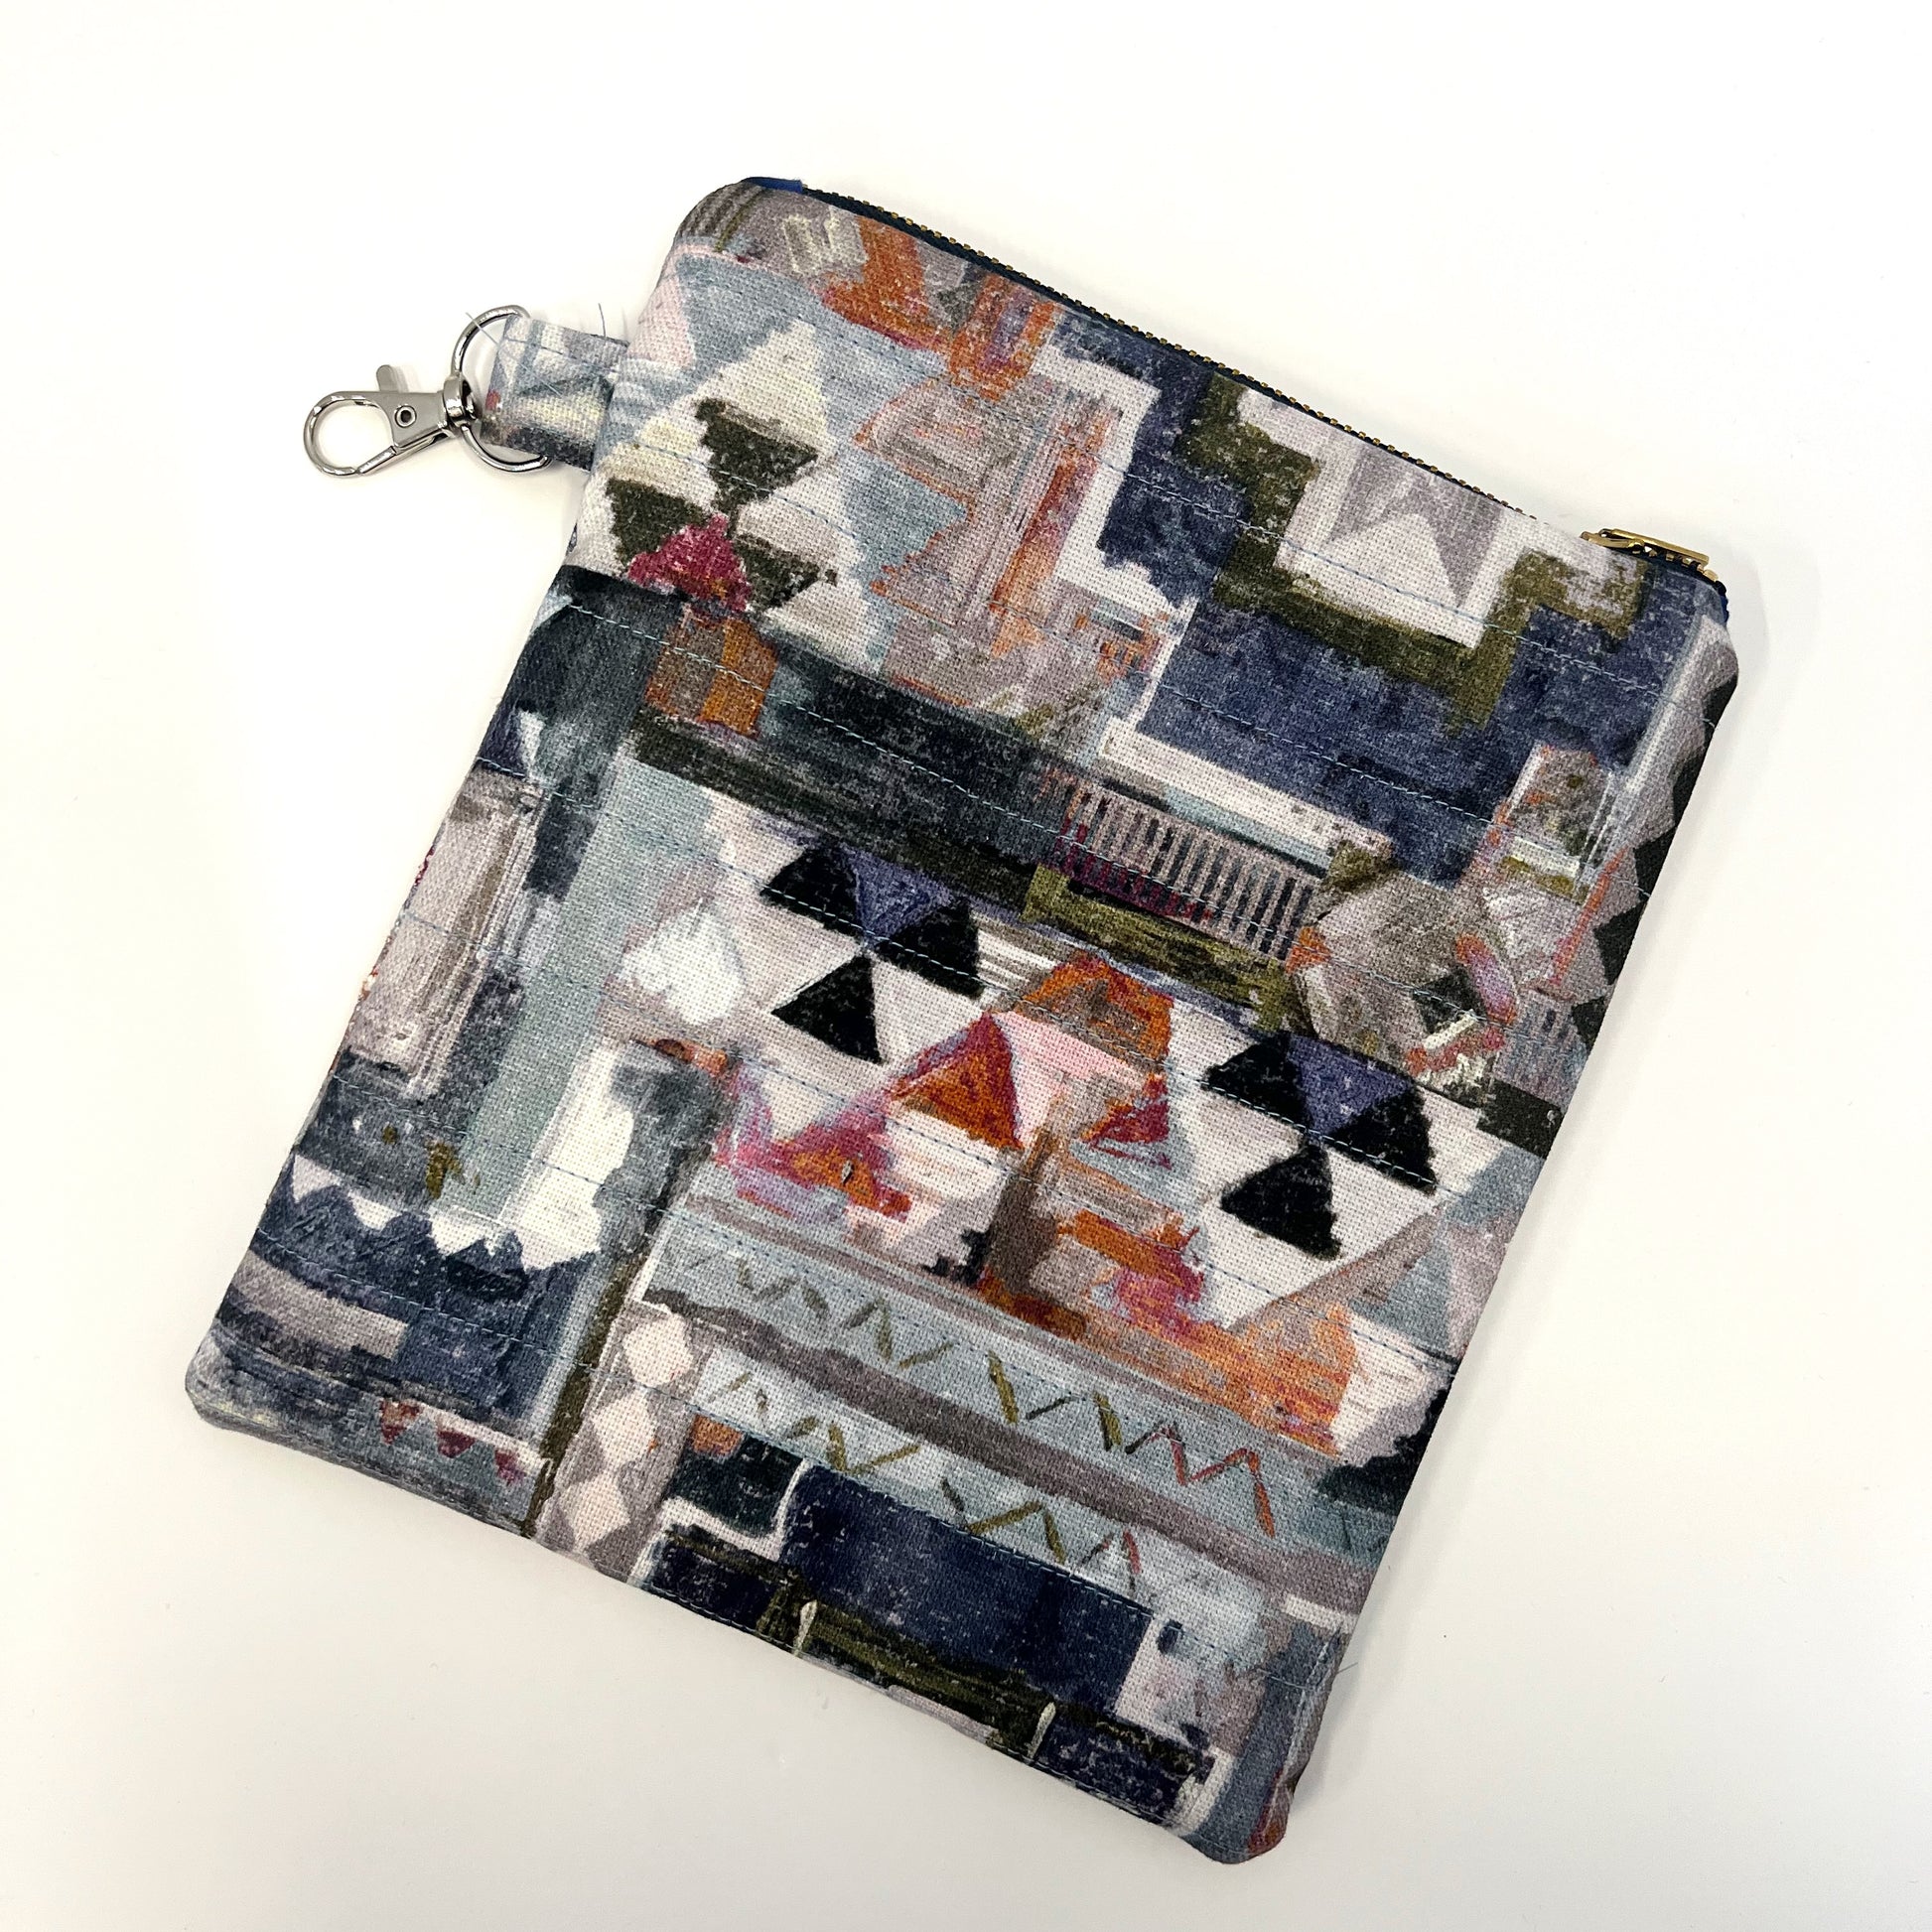 All Set to Sew - The Essentials Pouch - Printed Pattern - allsettosew